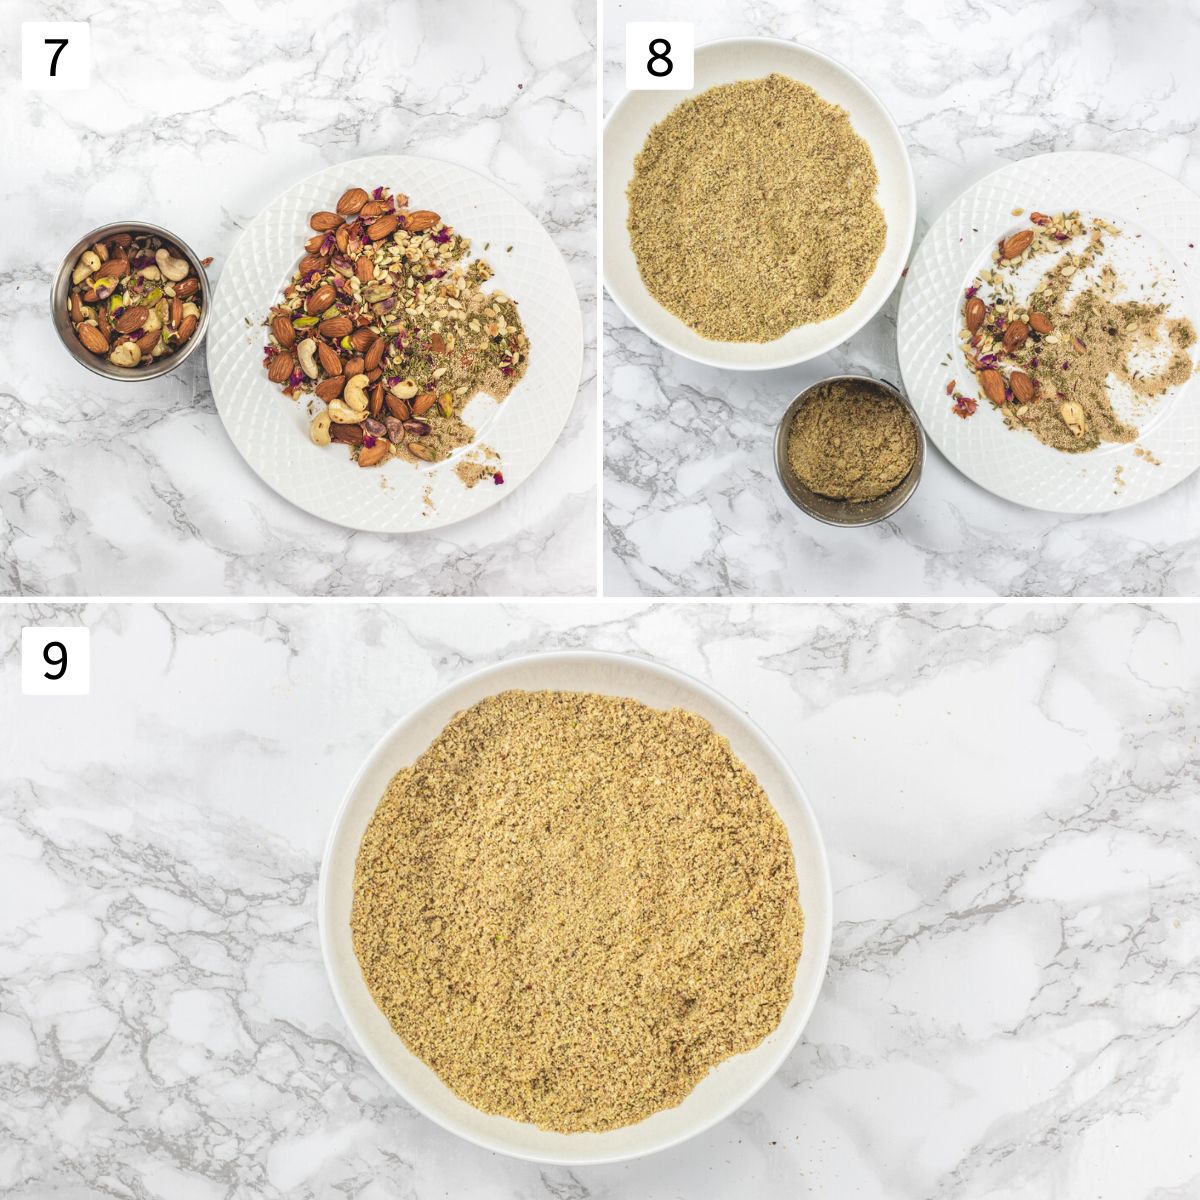 Collage of 3 images showing grinding nuts, spices mixture into powder in batches.